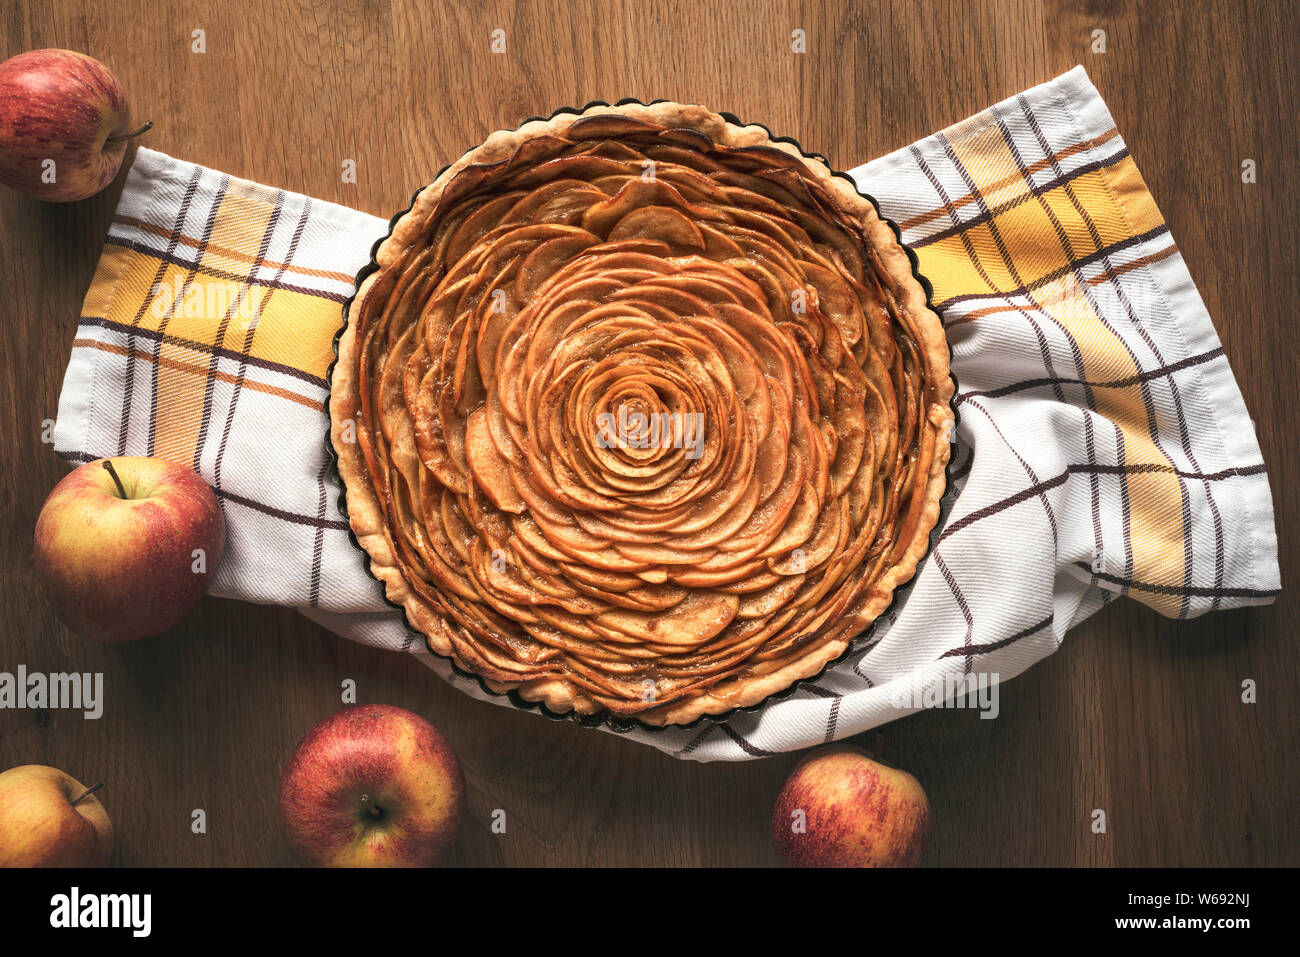 Apple pie decorated in shape of a rose flower, in a tray, on kitchen towel, surrounded by apples fruits, on vintage table. Above view of tatsy apple p Stock Photo